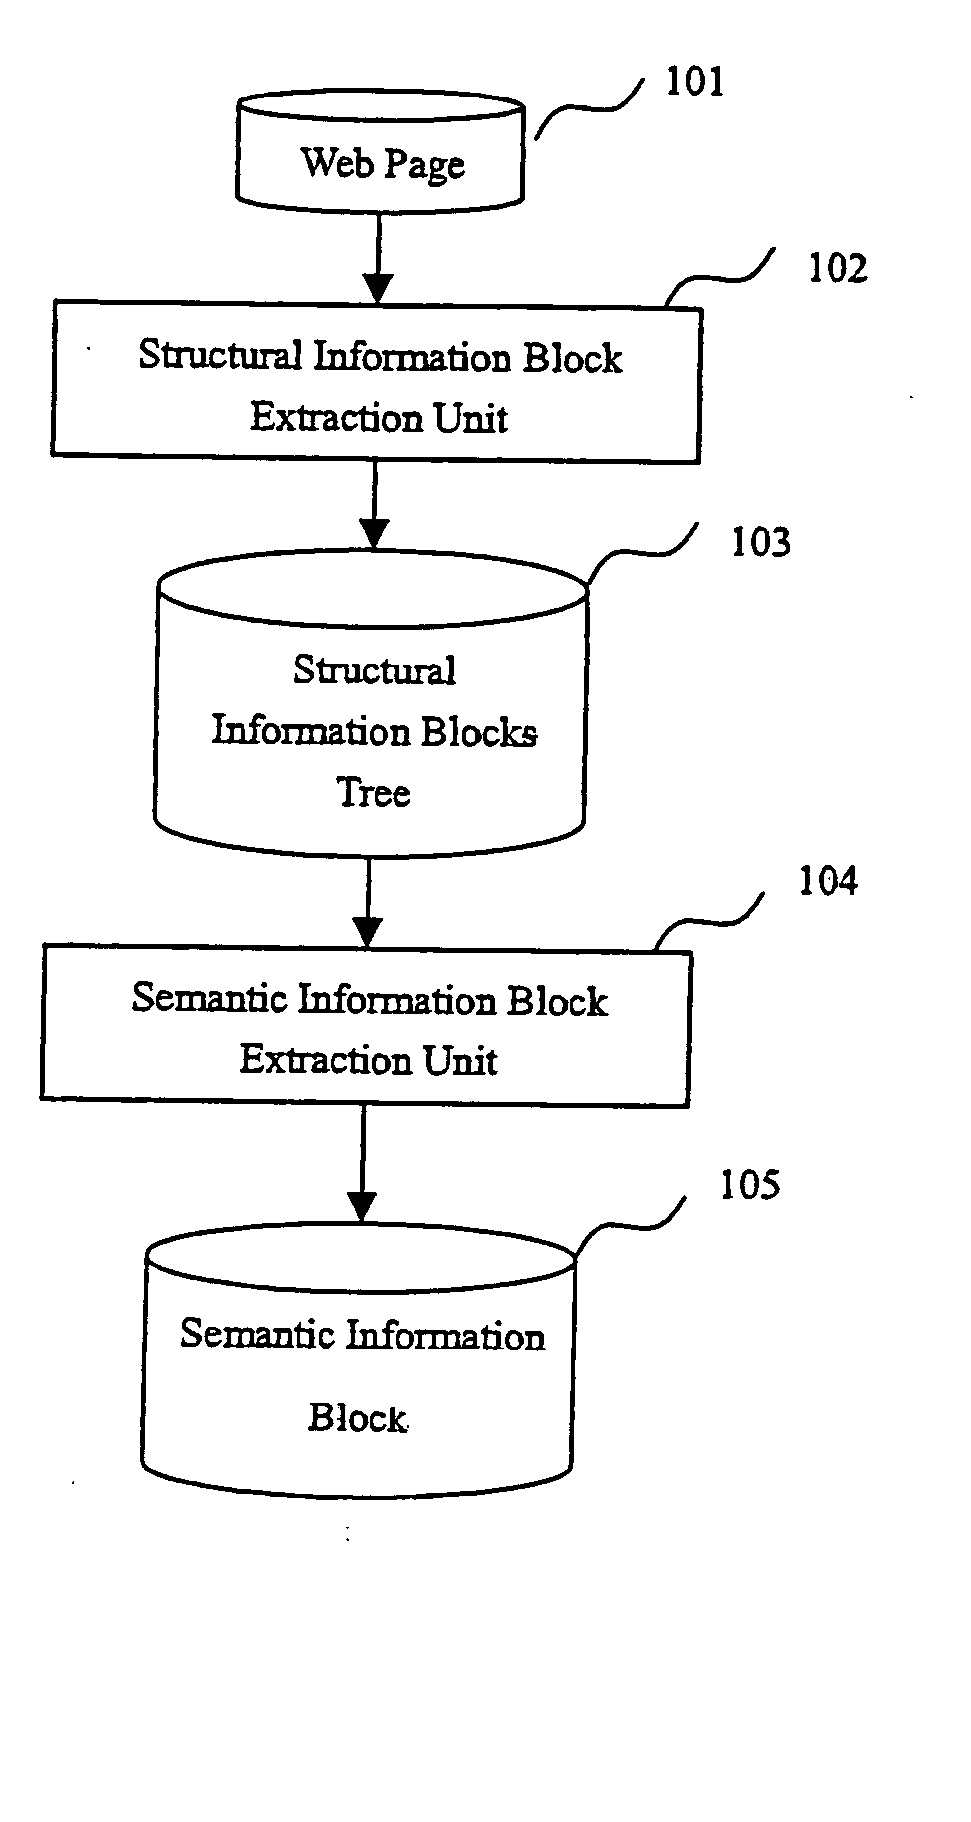 Information block extraction apparatus and method for Web pages